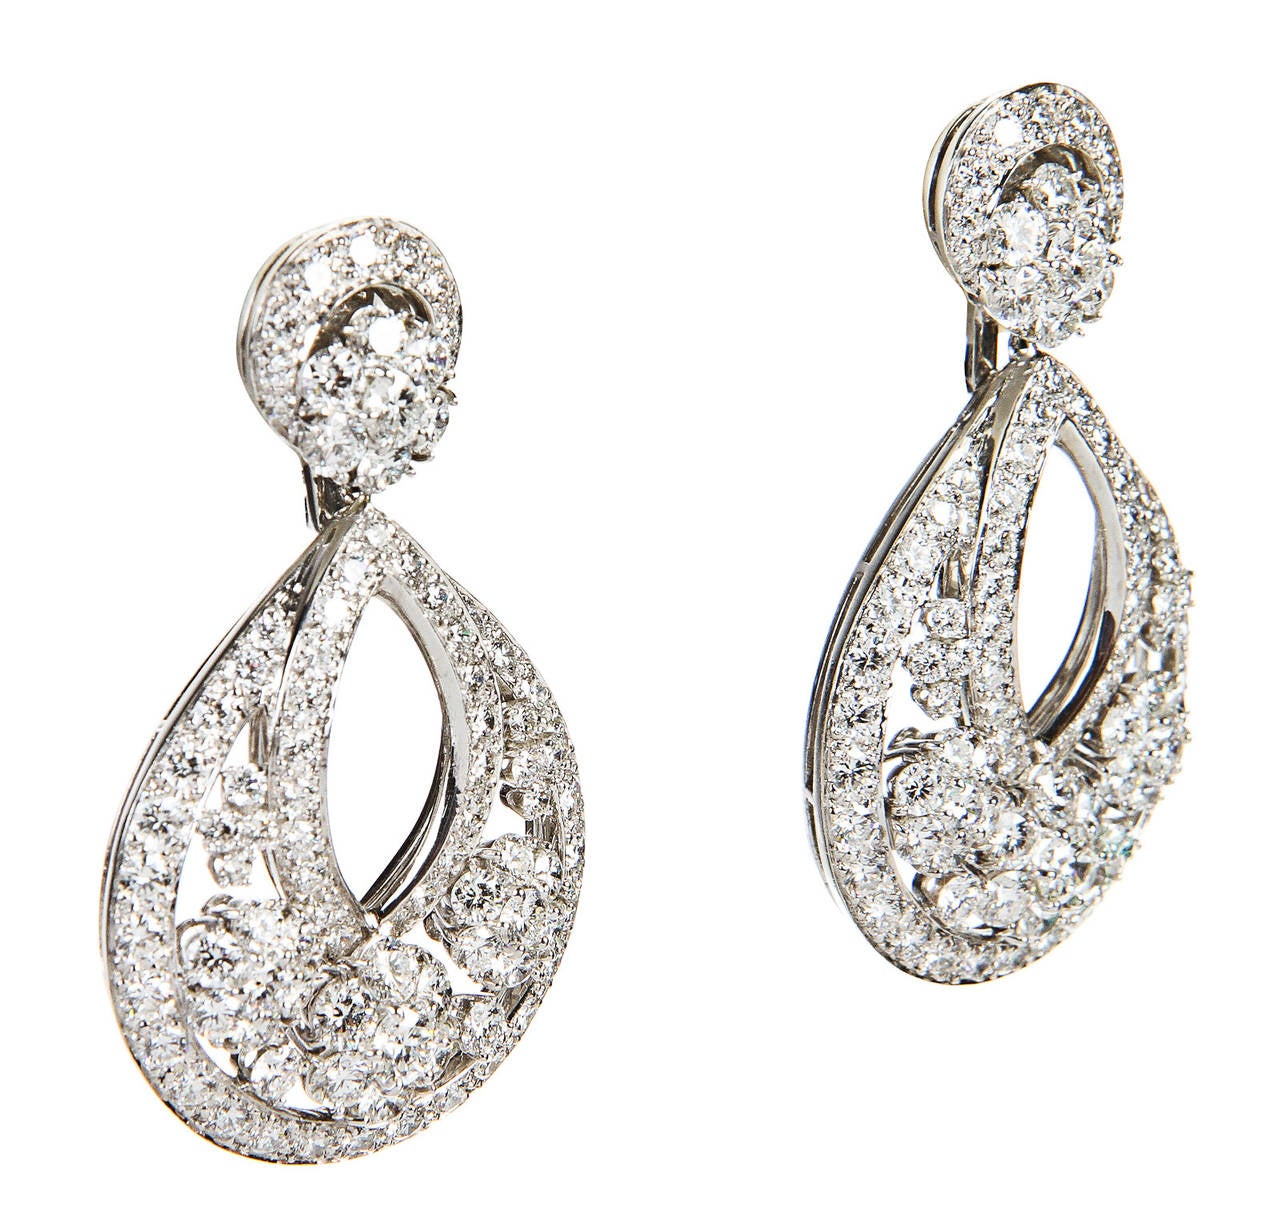 Seen here are these absolutely stunning Van Cleef & Arpels Platinum and Diamond Snowflake Earrings. These beautiful earrings are from the Snowflake Collection and were originally created in the 1940s. These same earrings were featured on the hit